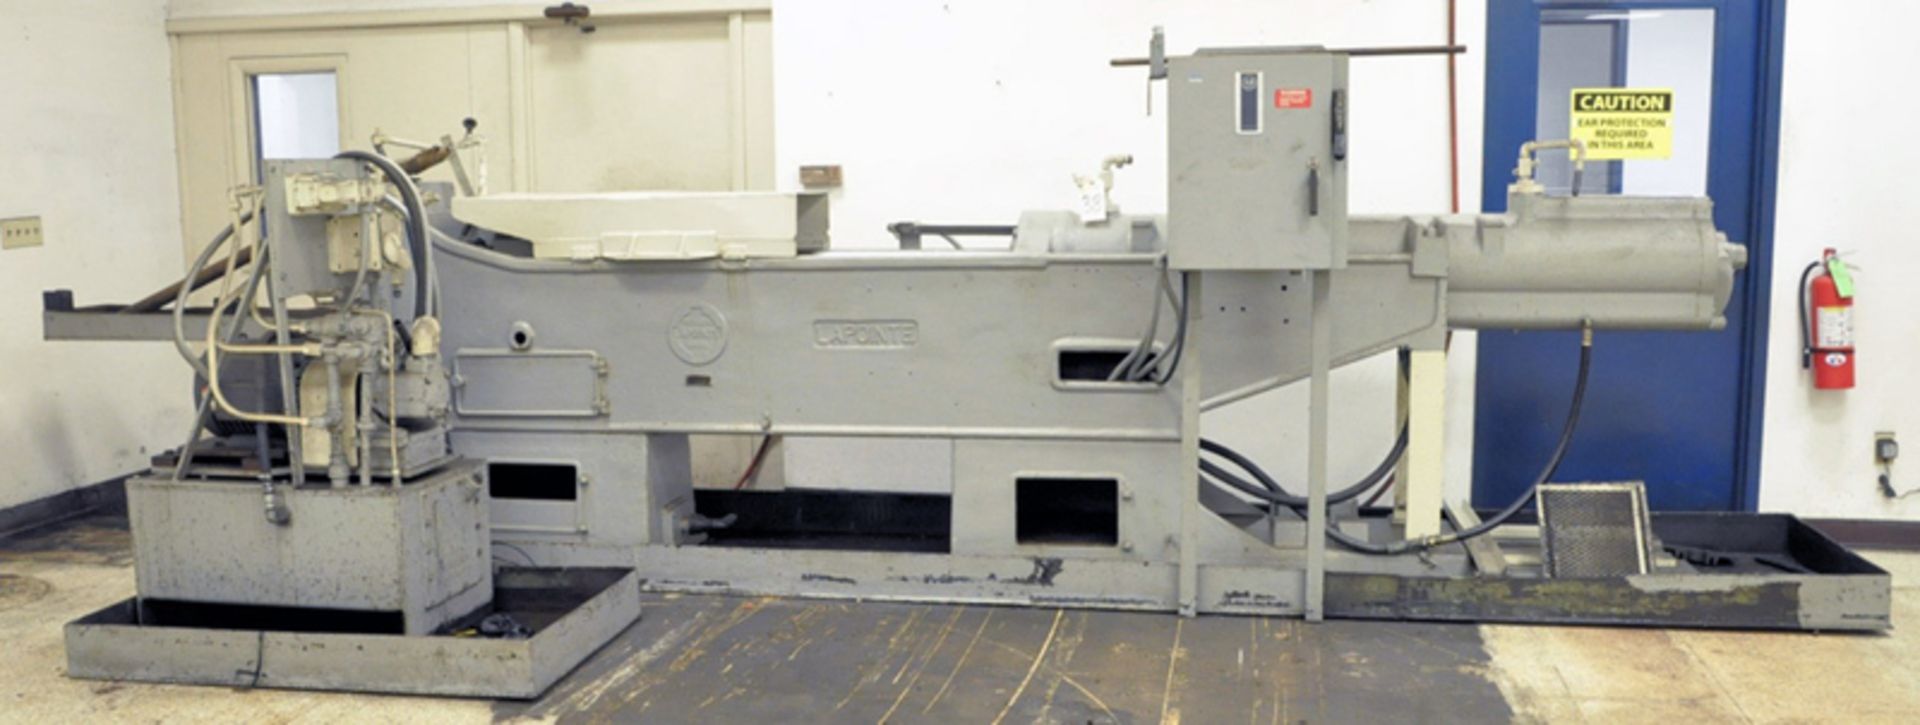 LaPoint Hydraulic Horizontal Broaching Machine | 15 ton x 66", Mdl: HP-30, S/N: F-303, Located In: